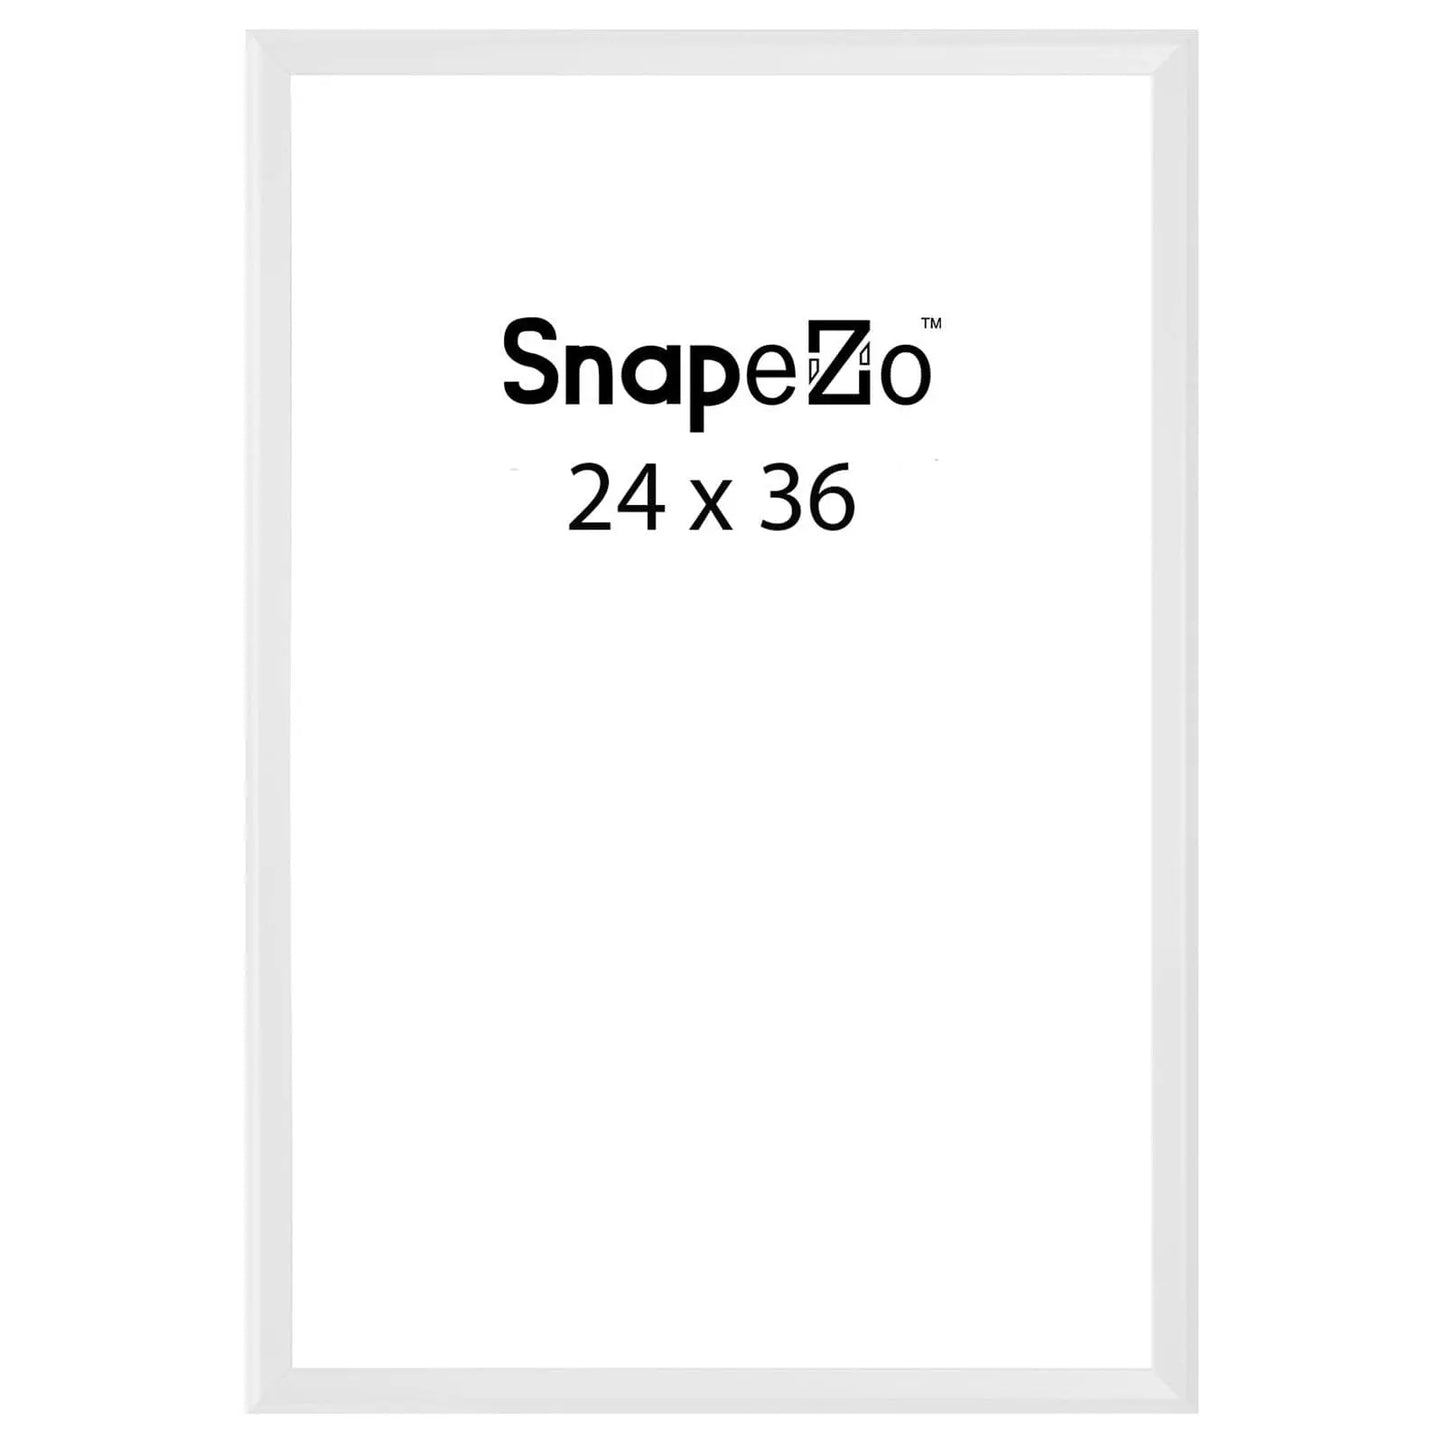 White locking snap frame poster size 24X36 - 1.25 inch profile - Snap Frames Direct